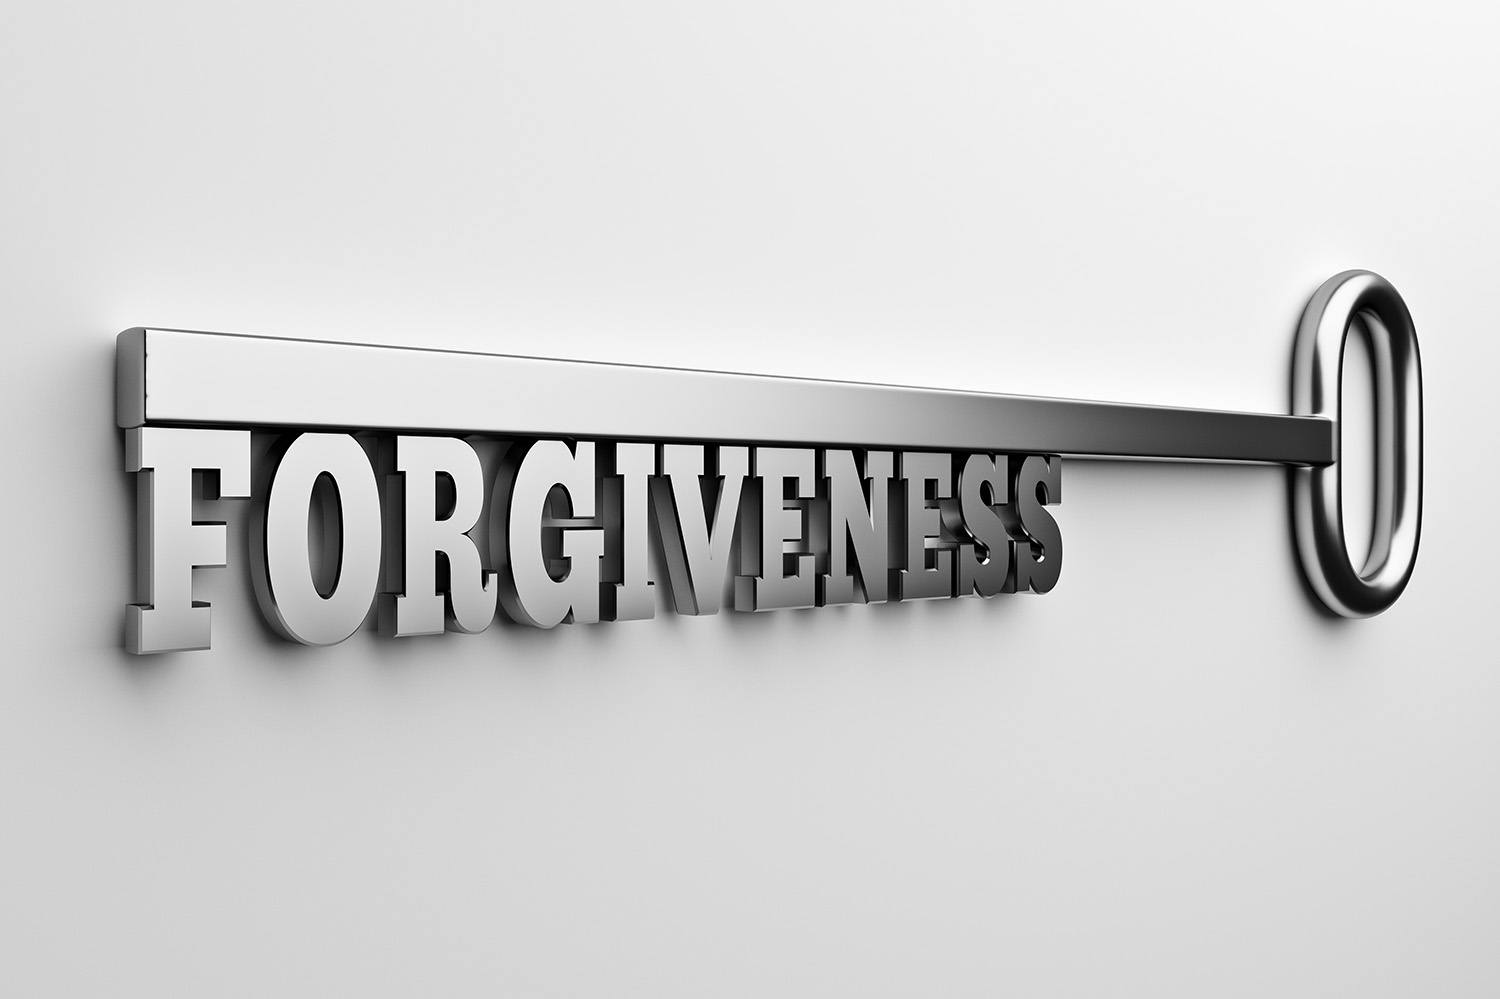 Forgiveness: What Is It?